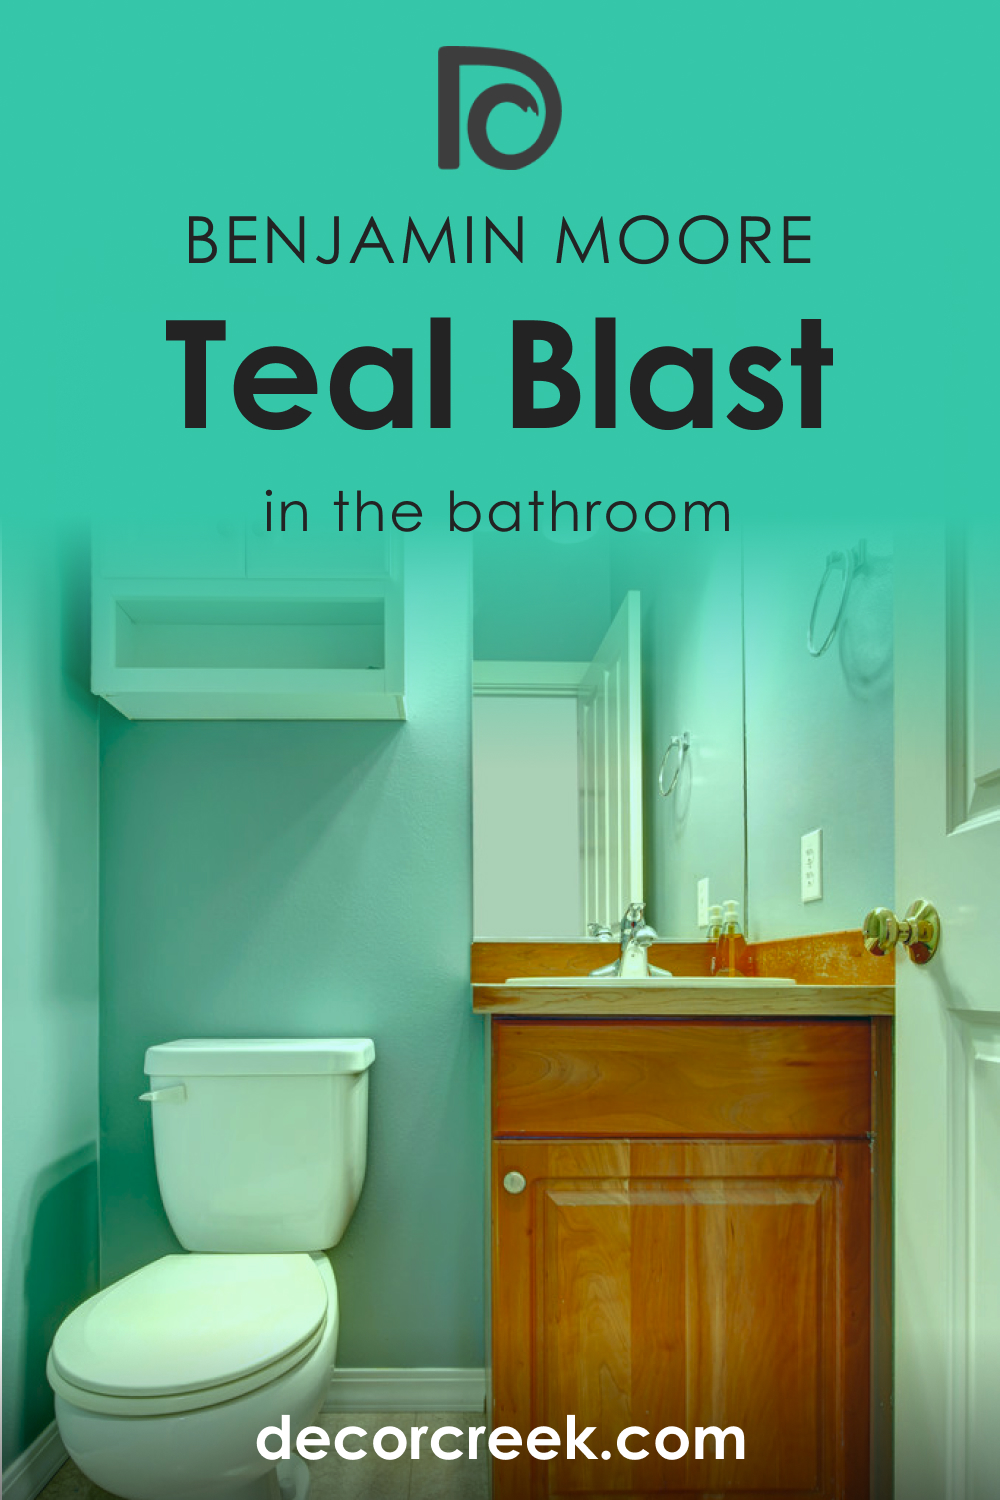 How to Use Teal Blast 2039-40 in the Bathroom?